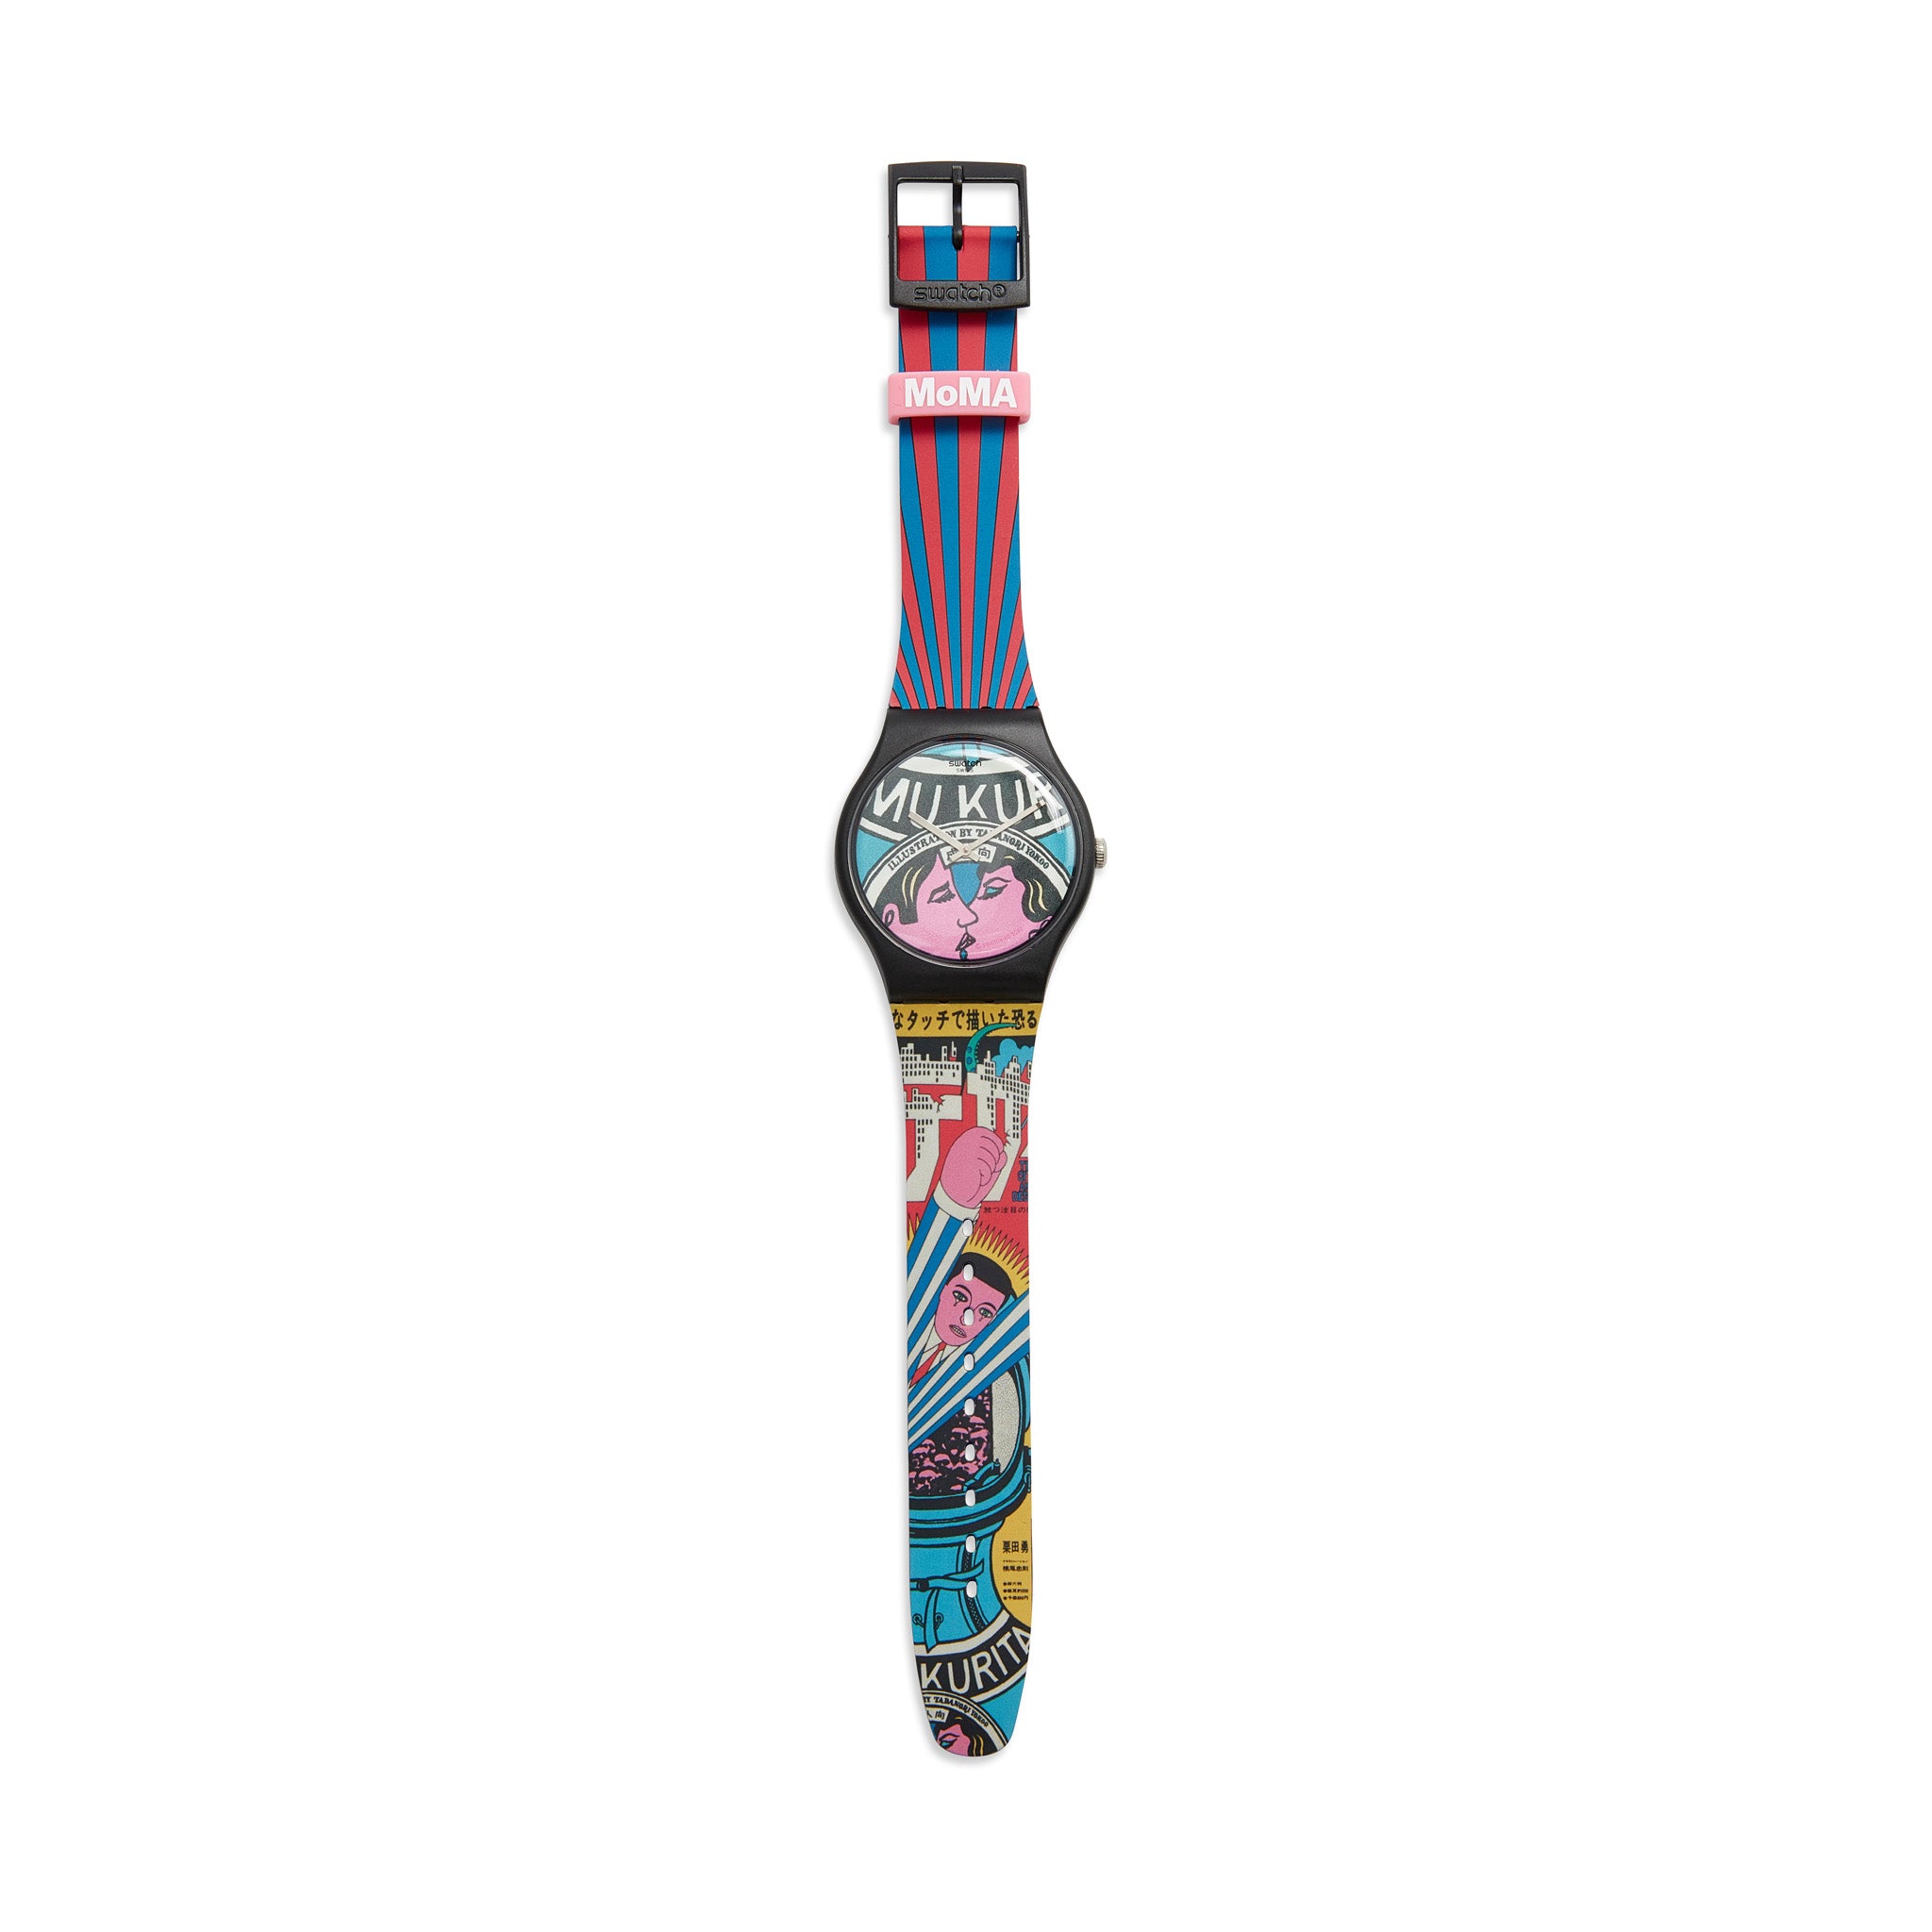 Swatch x MoMA Watches - Rousseau – MoMA Design Store